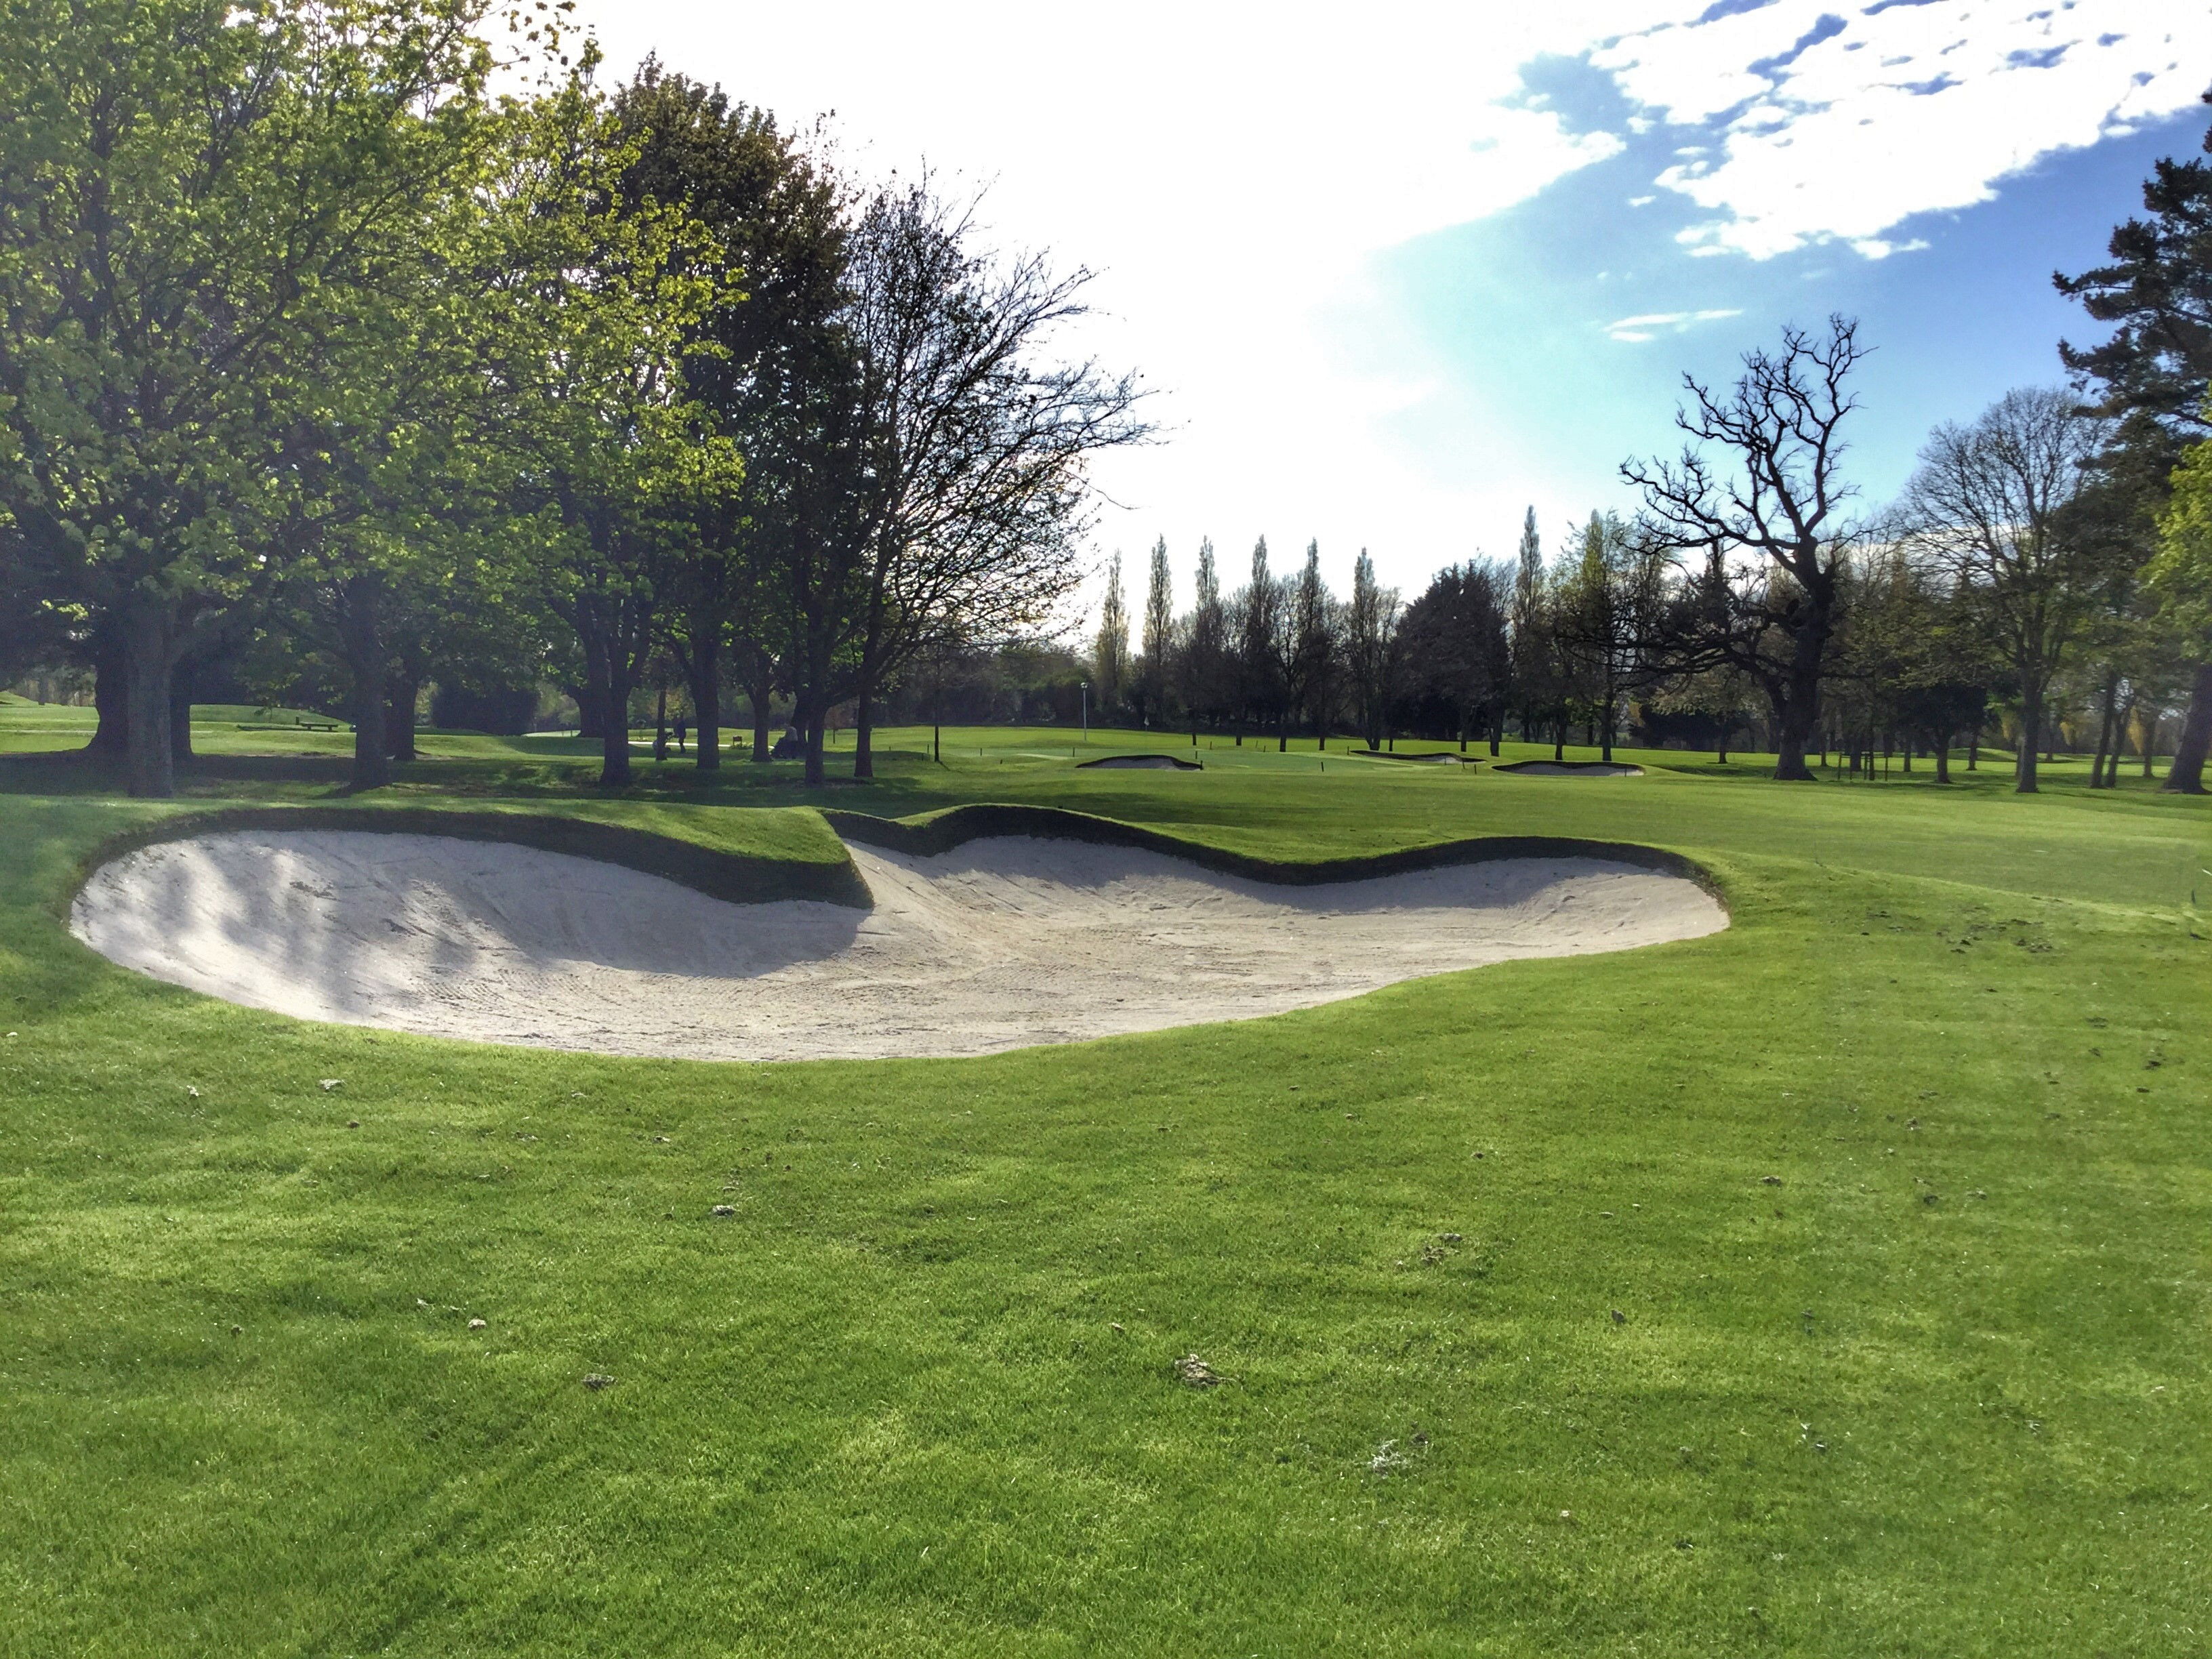 Durabunker Shallow Edge distributed by Jebsen & Jessen Technology - Turf & Irrigation Division under the new exclusive partnership